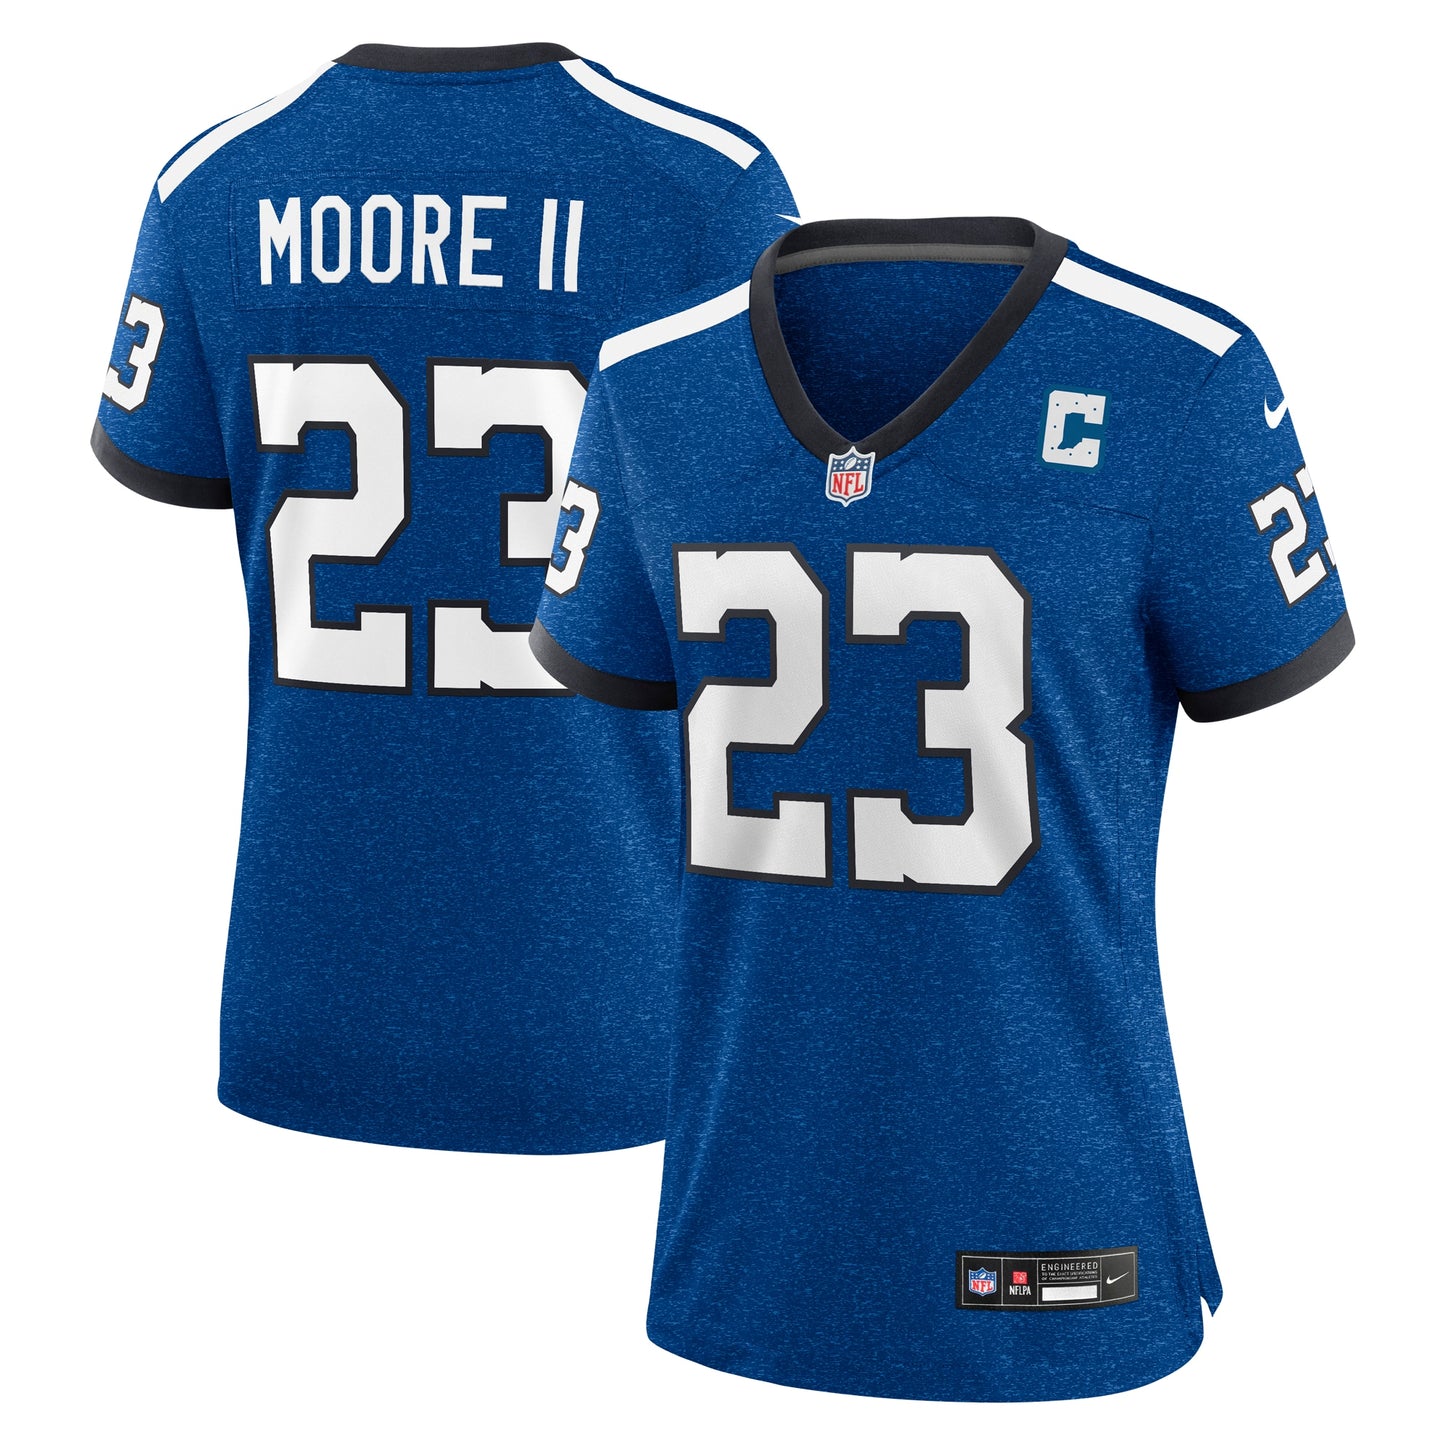 Kenny Moore II Indianapolis Colts Nike Women's Indiana Nights Alternate Game Jersey - Royal